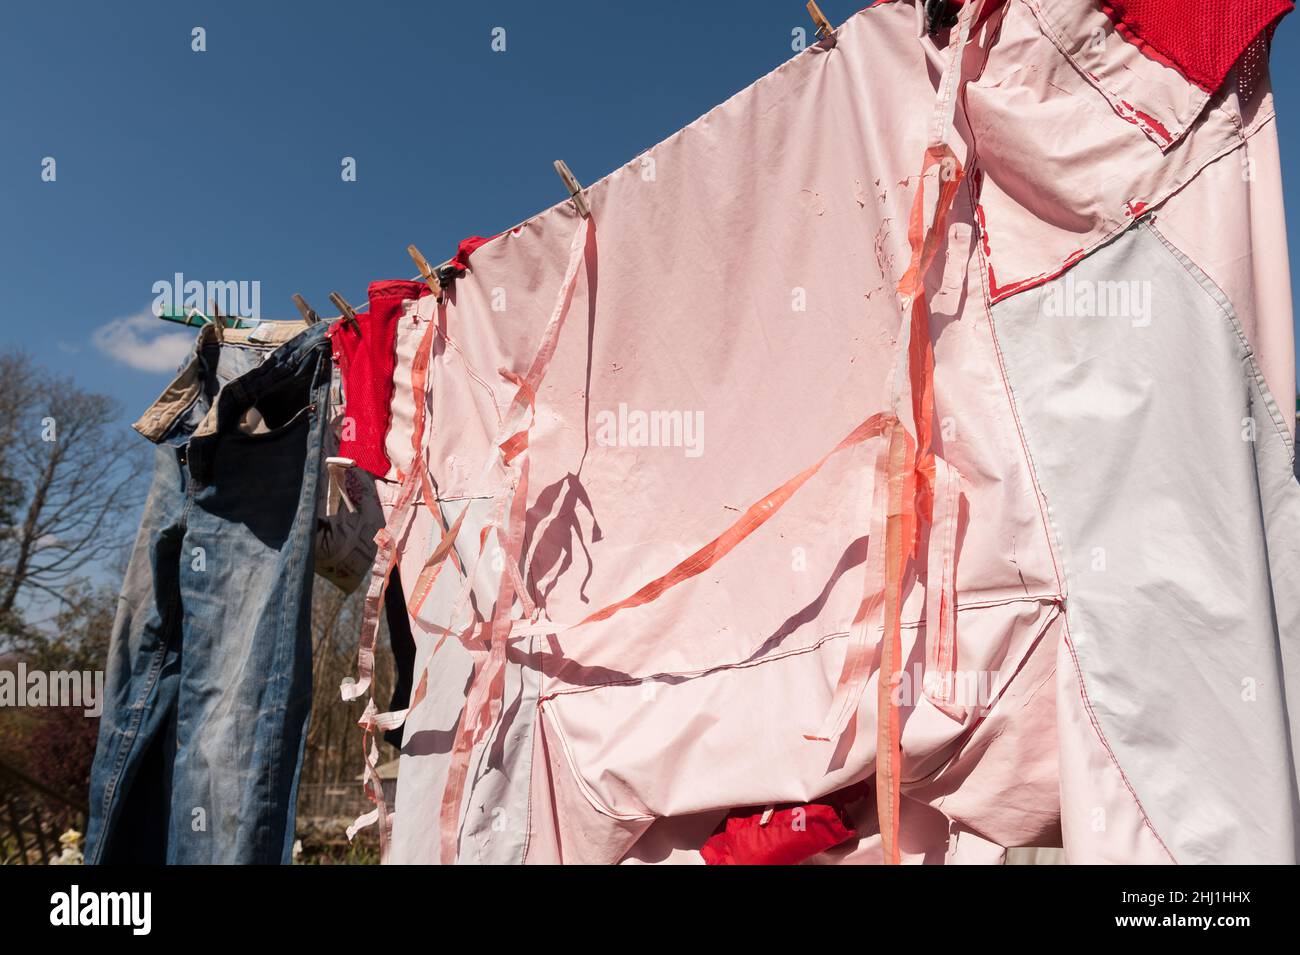 Wrong wash cycle and heat setting on washing cycle leading to waterproofing coating of rain jacket being ruined flaking off seams pleats falling off Stock Photo